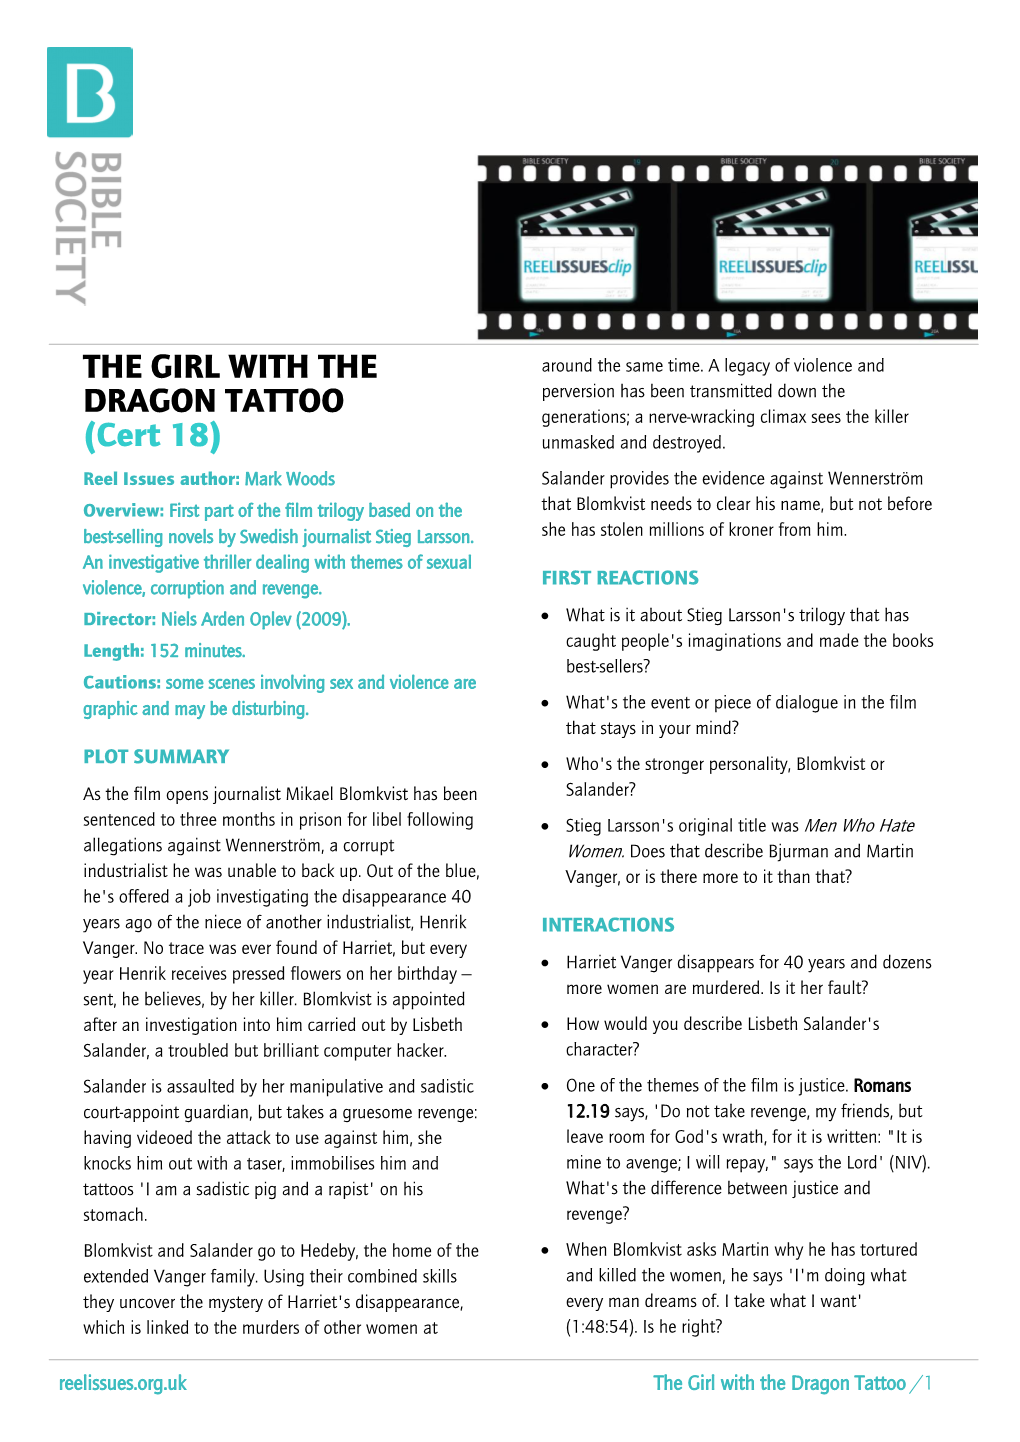 The Girl with the Dragon Tattoo /1